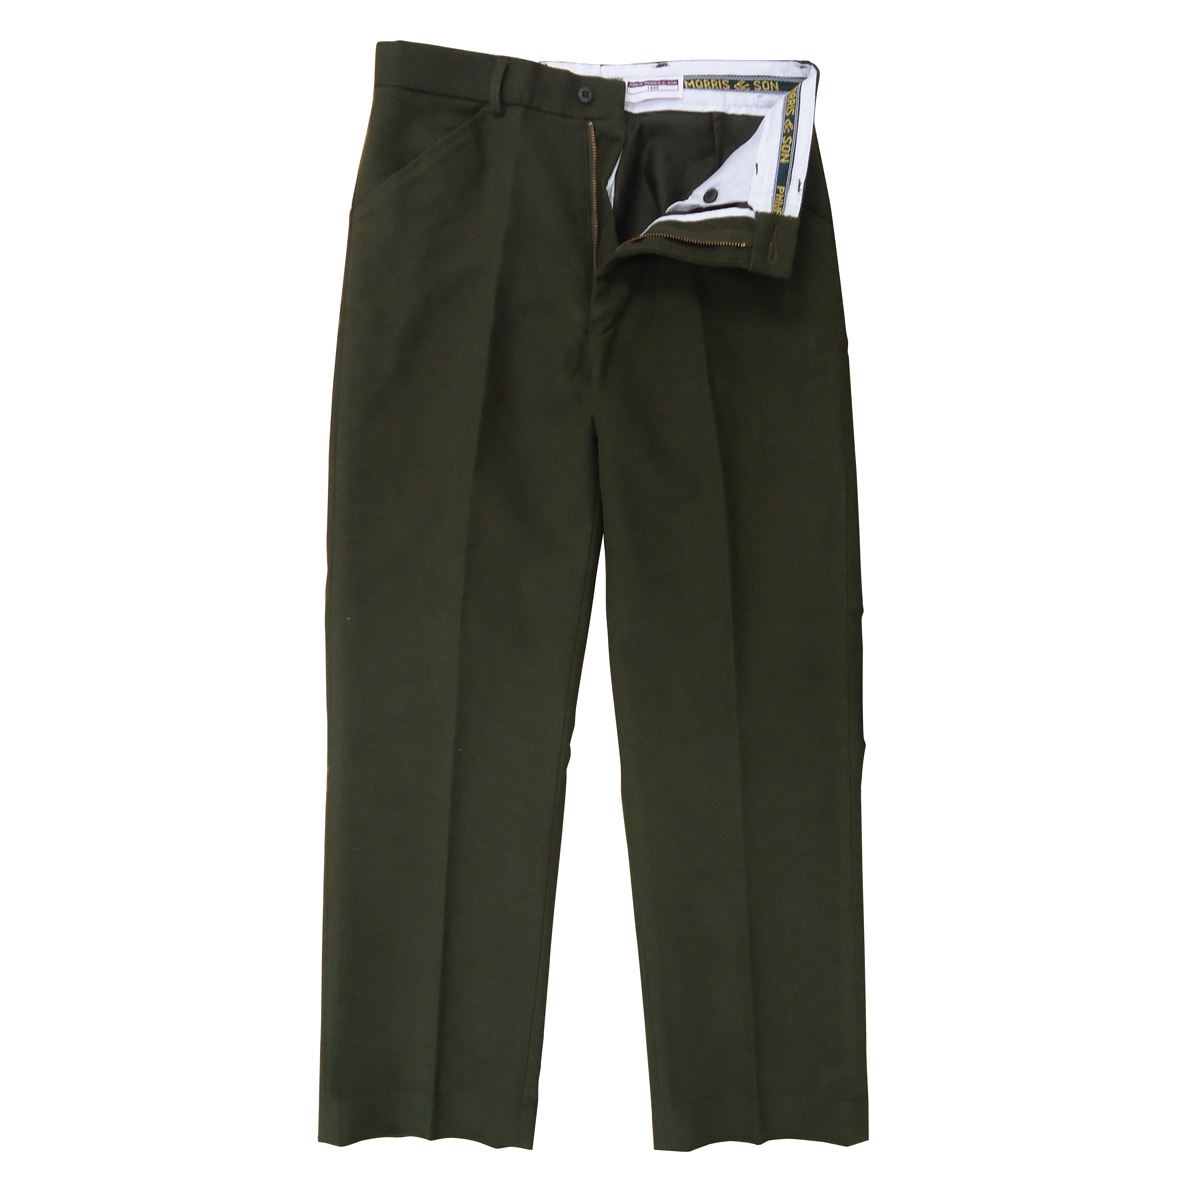 What are moleskin trousers?